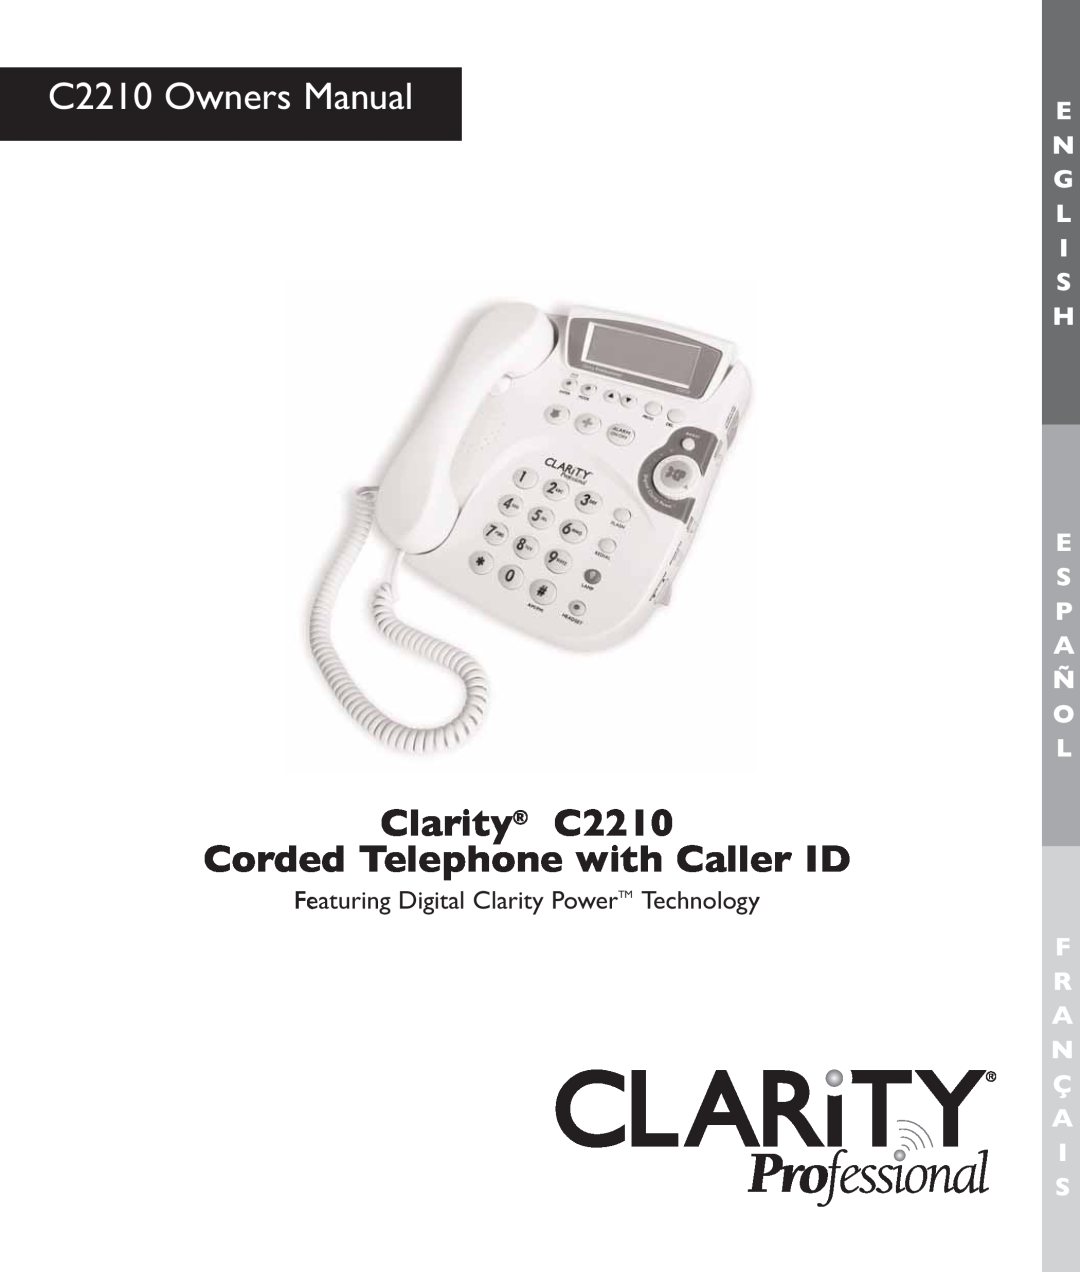 Clarity c2210 manual C2210 Owners Manual, Clarity C2210 Corded Telephone with Caller ID 